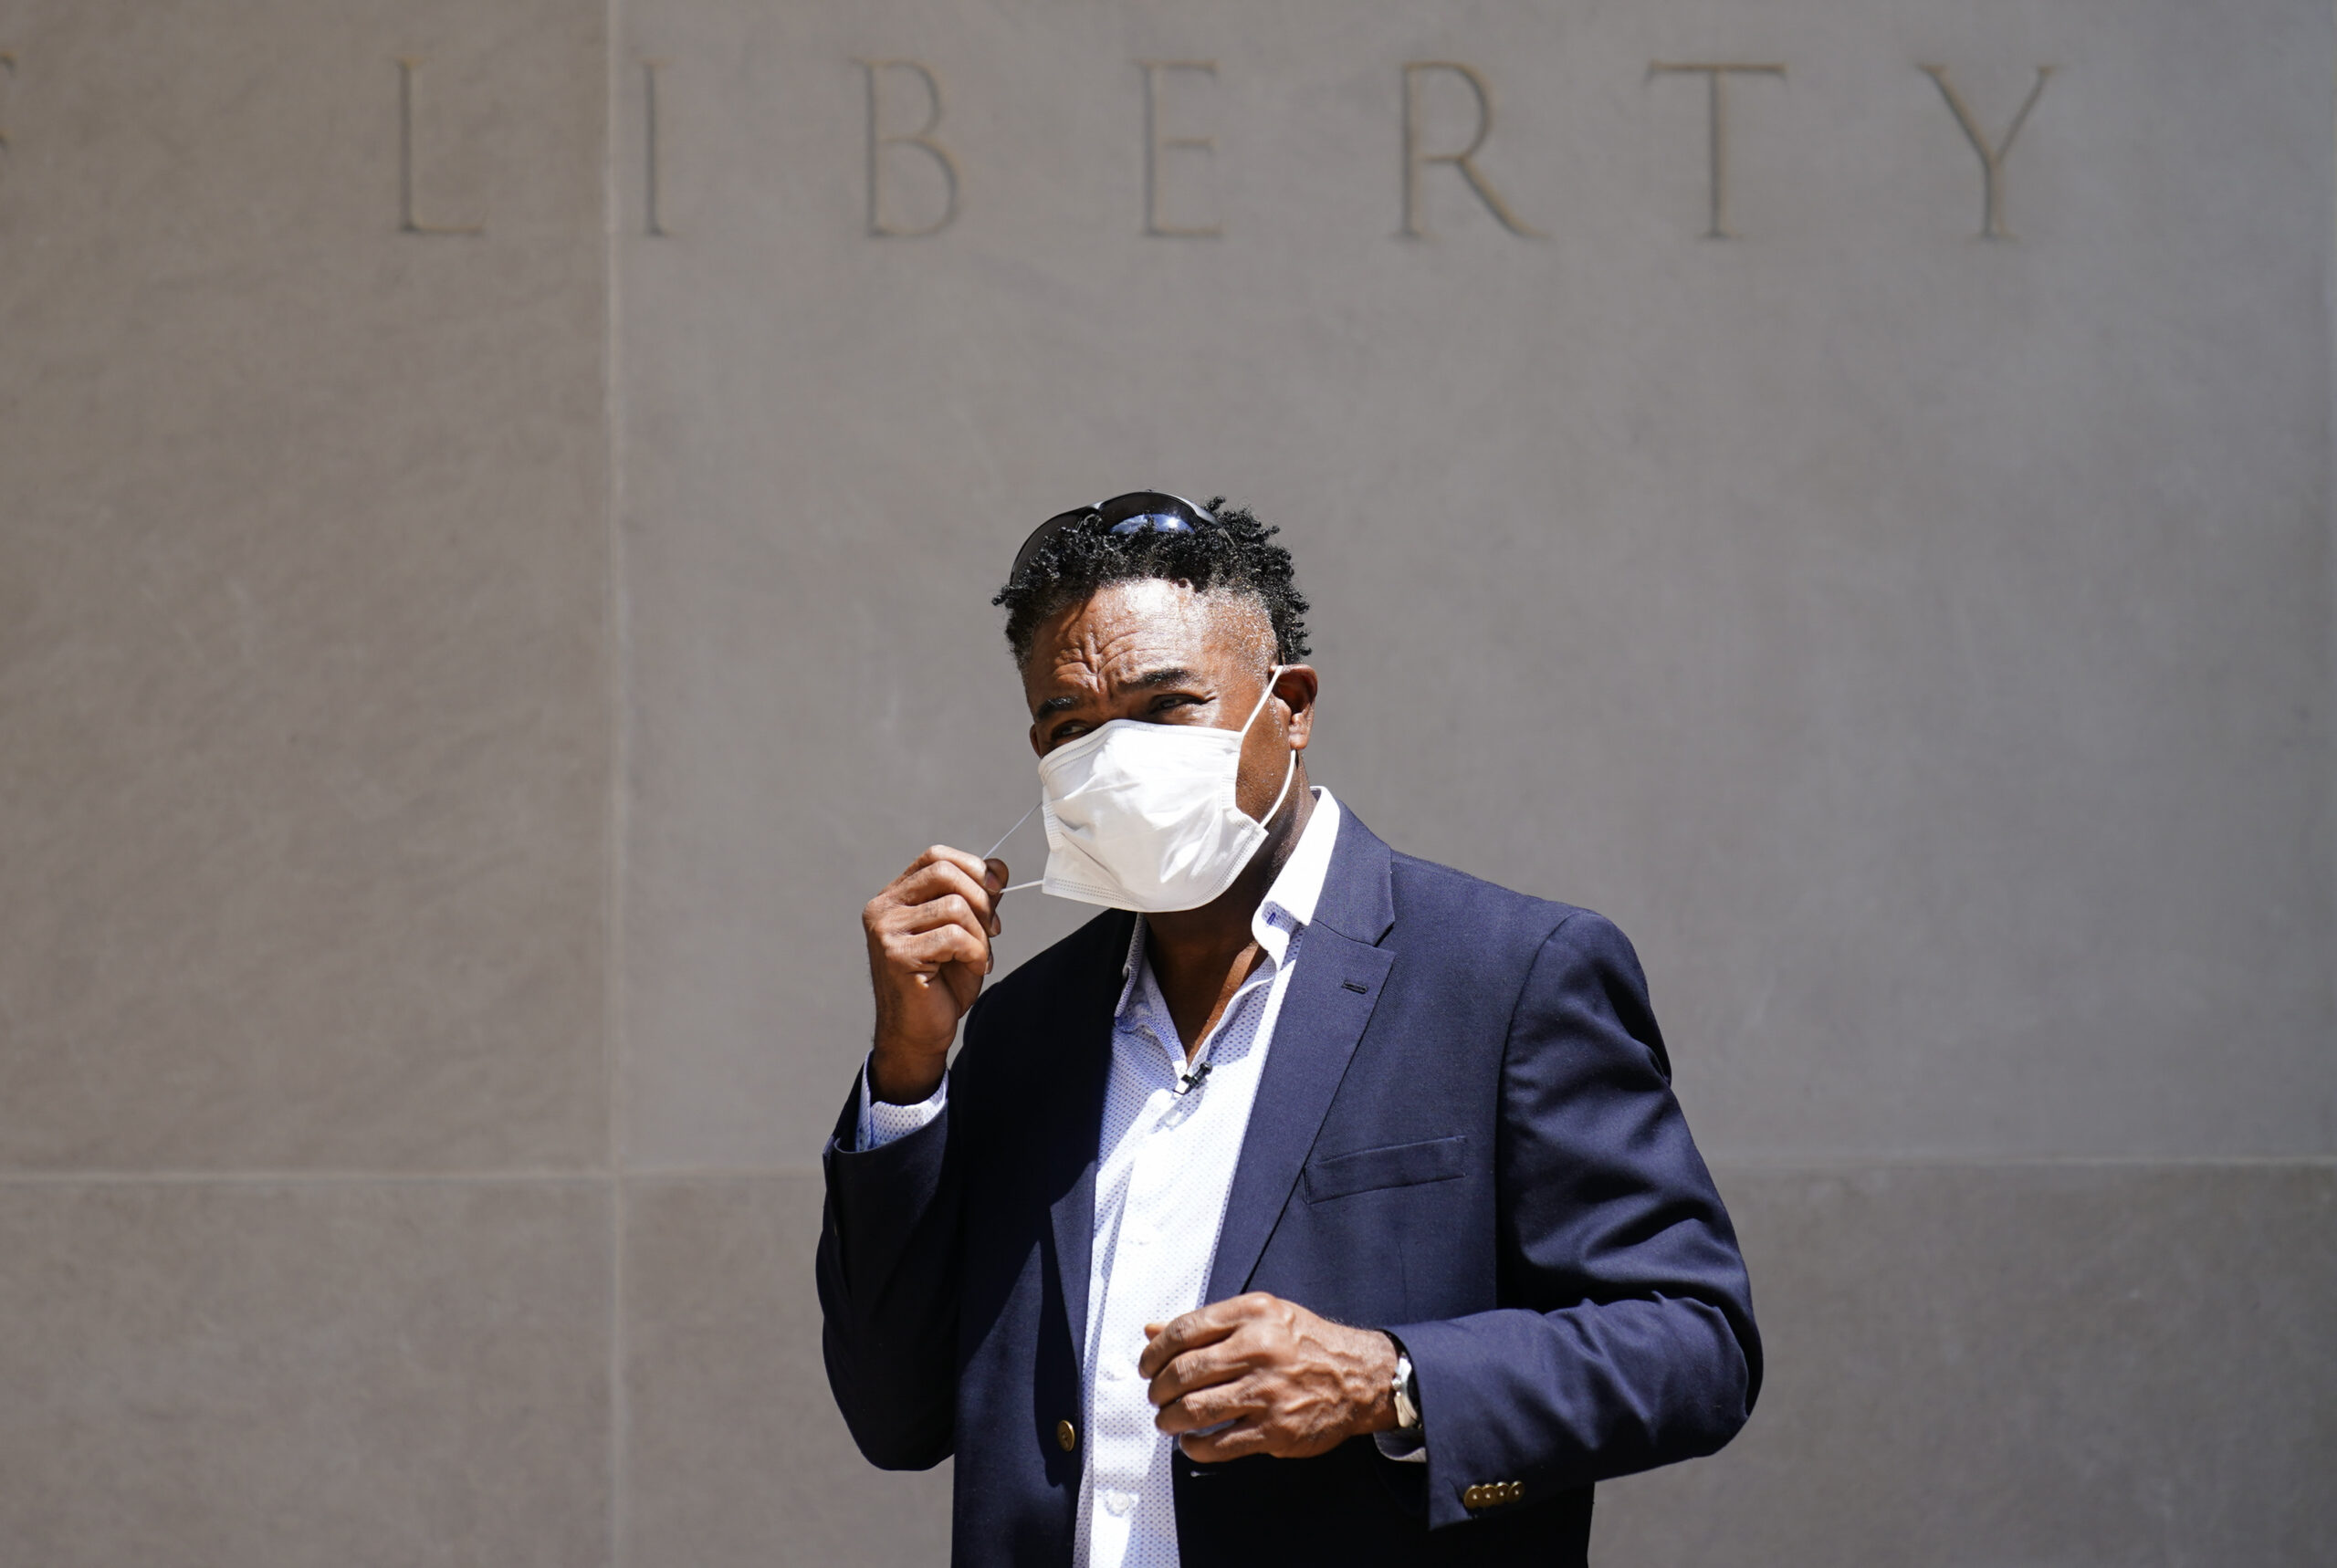 Former NFL player Ken Jenkins exits the building after delivering tens of thousands of petitions demanding equal treatment for everyone involved in the settlement of concussion claims against the NFL, to the federal courthouse in Philadelphia, Friday, May 14, 2021. (AP Photo/Matt Rourke)